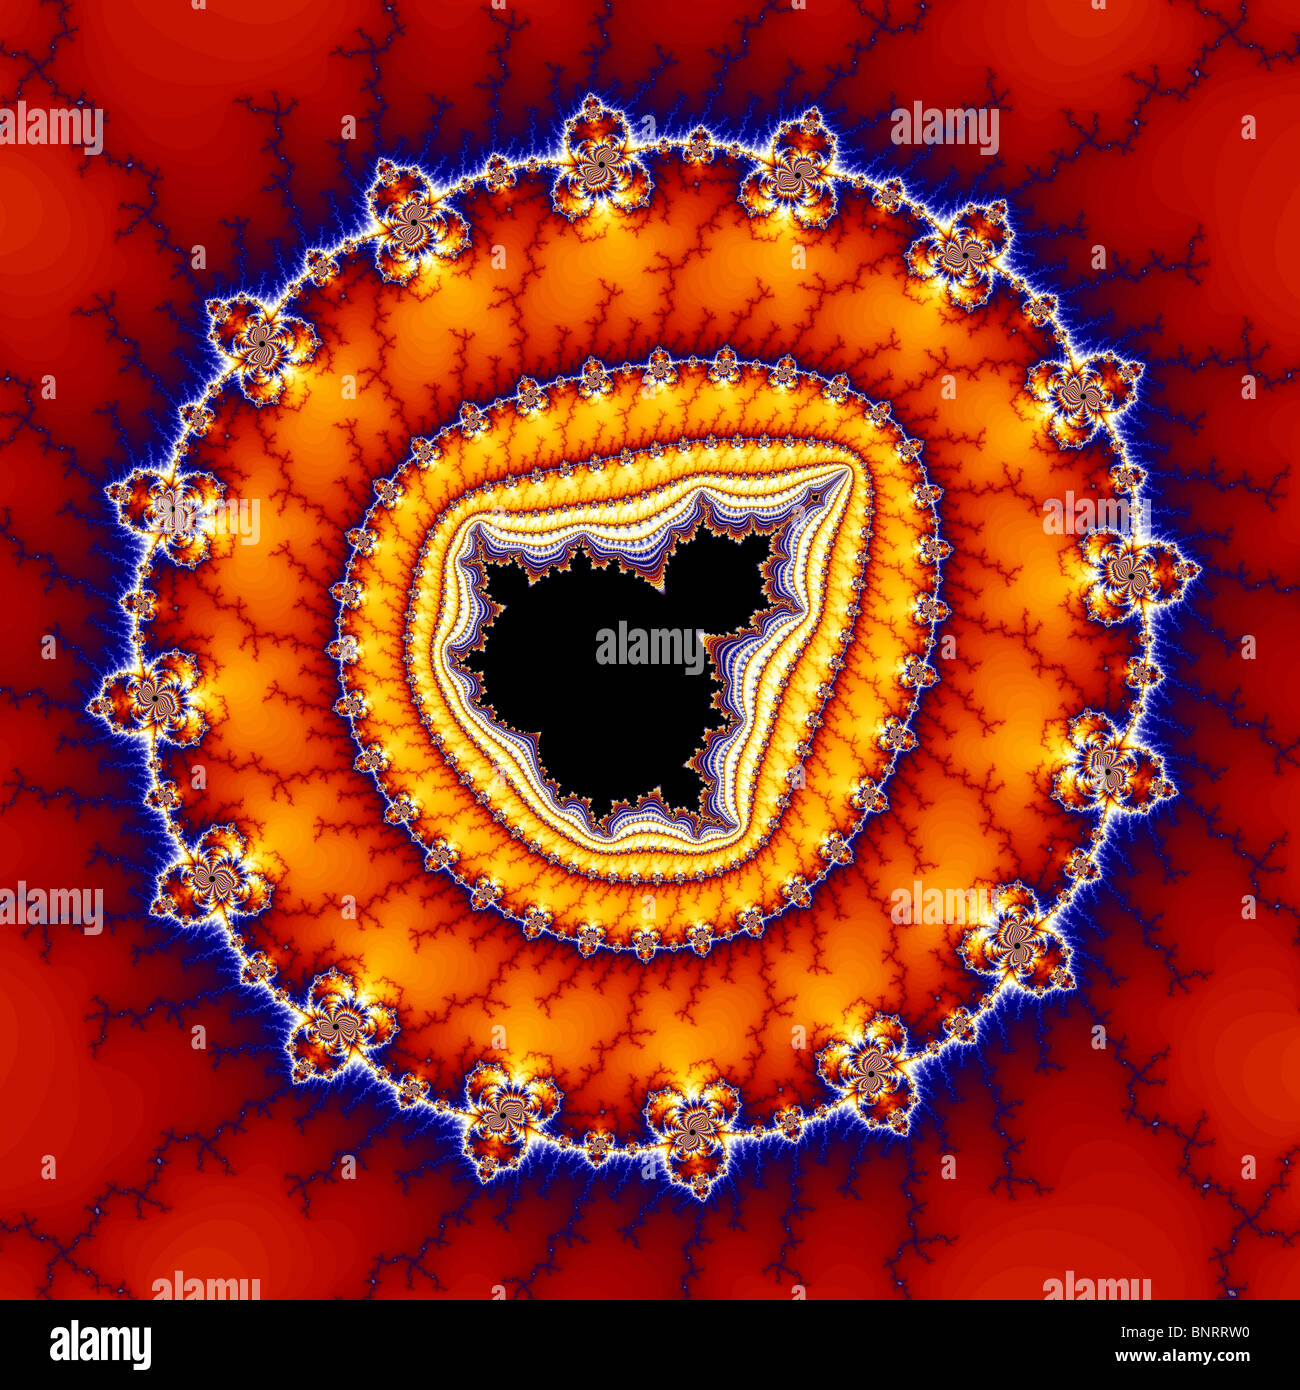 The Mandelbrot Set contains an infinite number of copies of itself ( 'mini Mandelbrots'), surrounded by complex patterns. Stock Photo